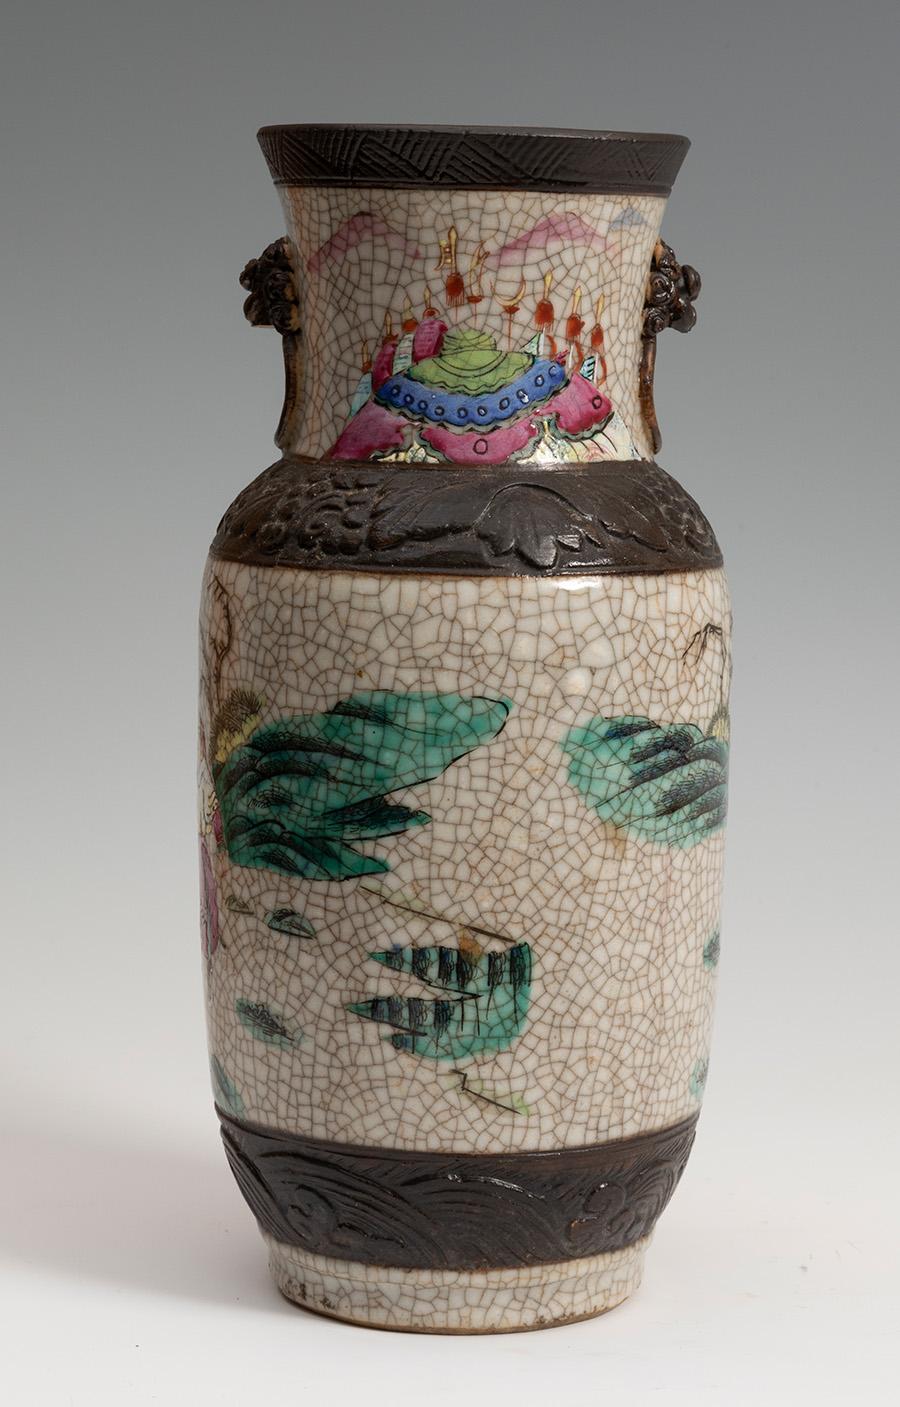 Early 20th century Chinese glazed enamel porcelain decorated with palace courtiers and farmer scenes, edged in brown tone moulding and two lion-heads on the neck.